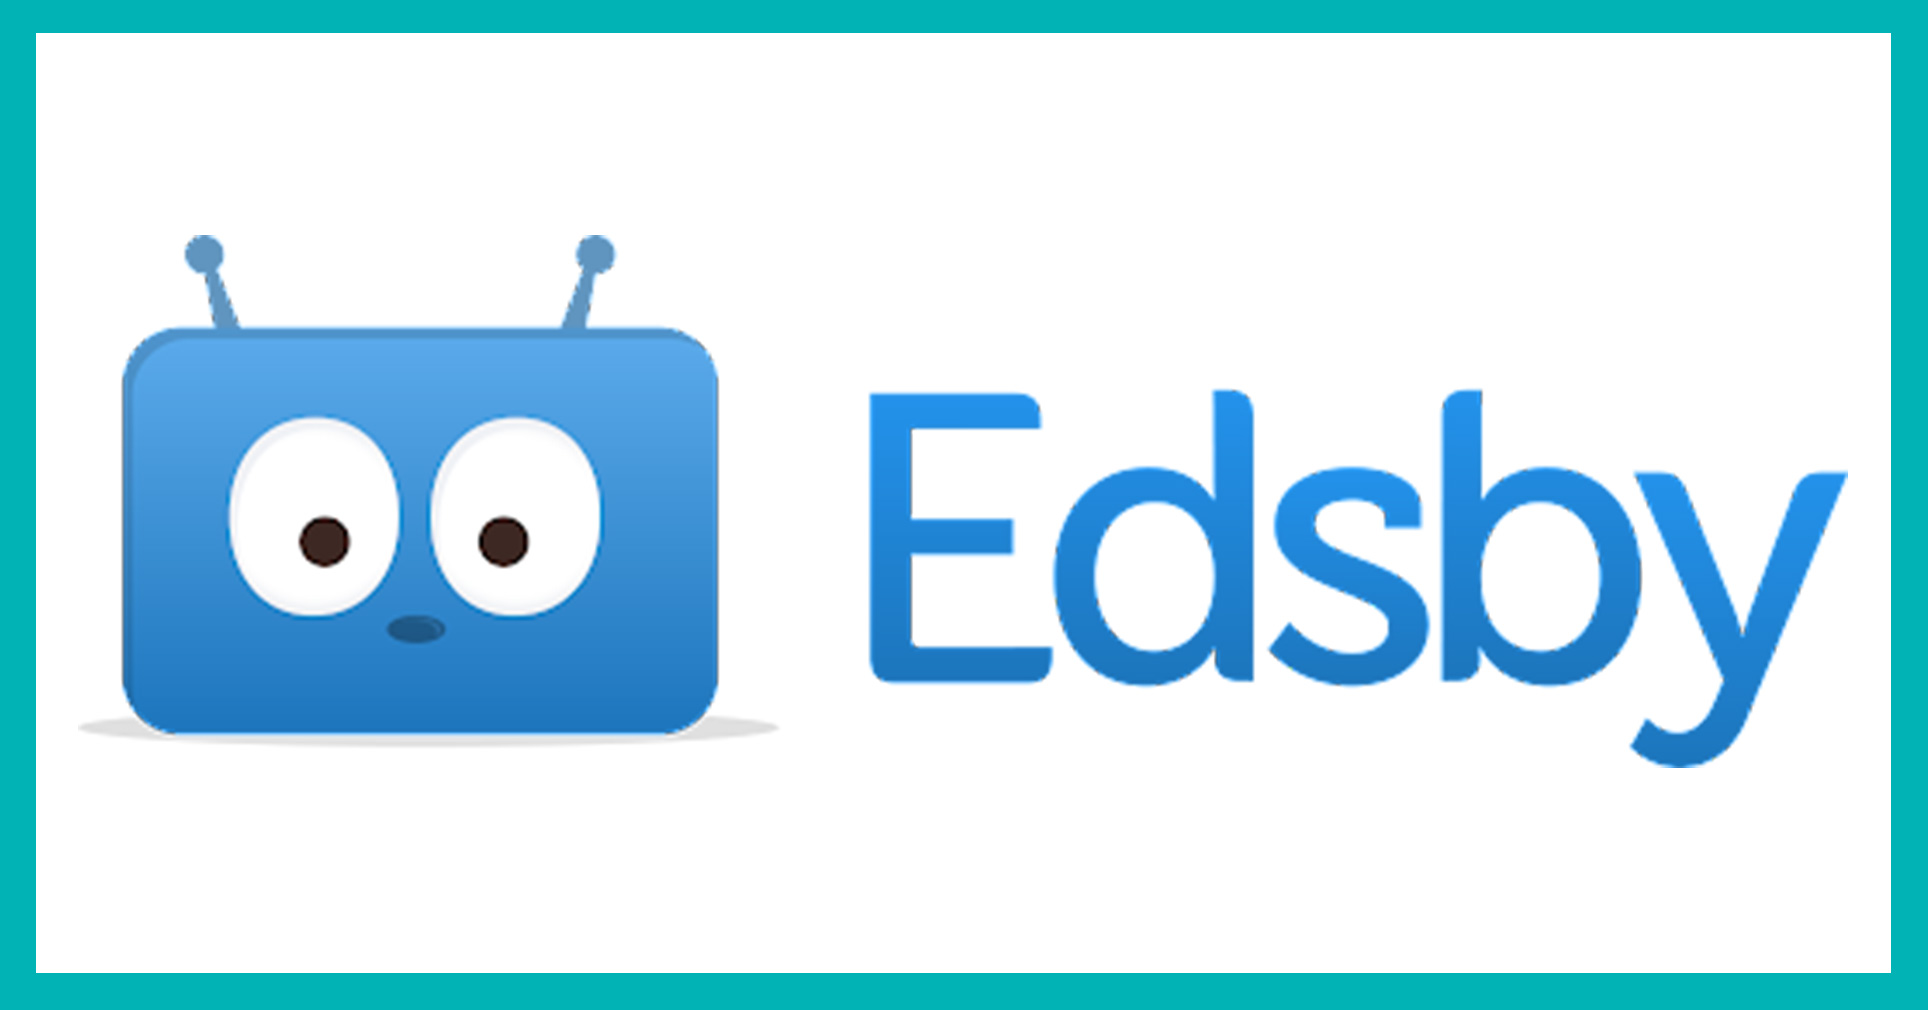 Are you active on Edsby?